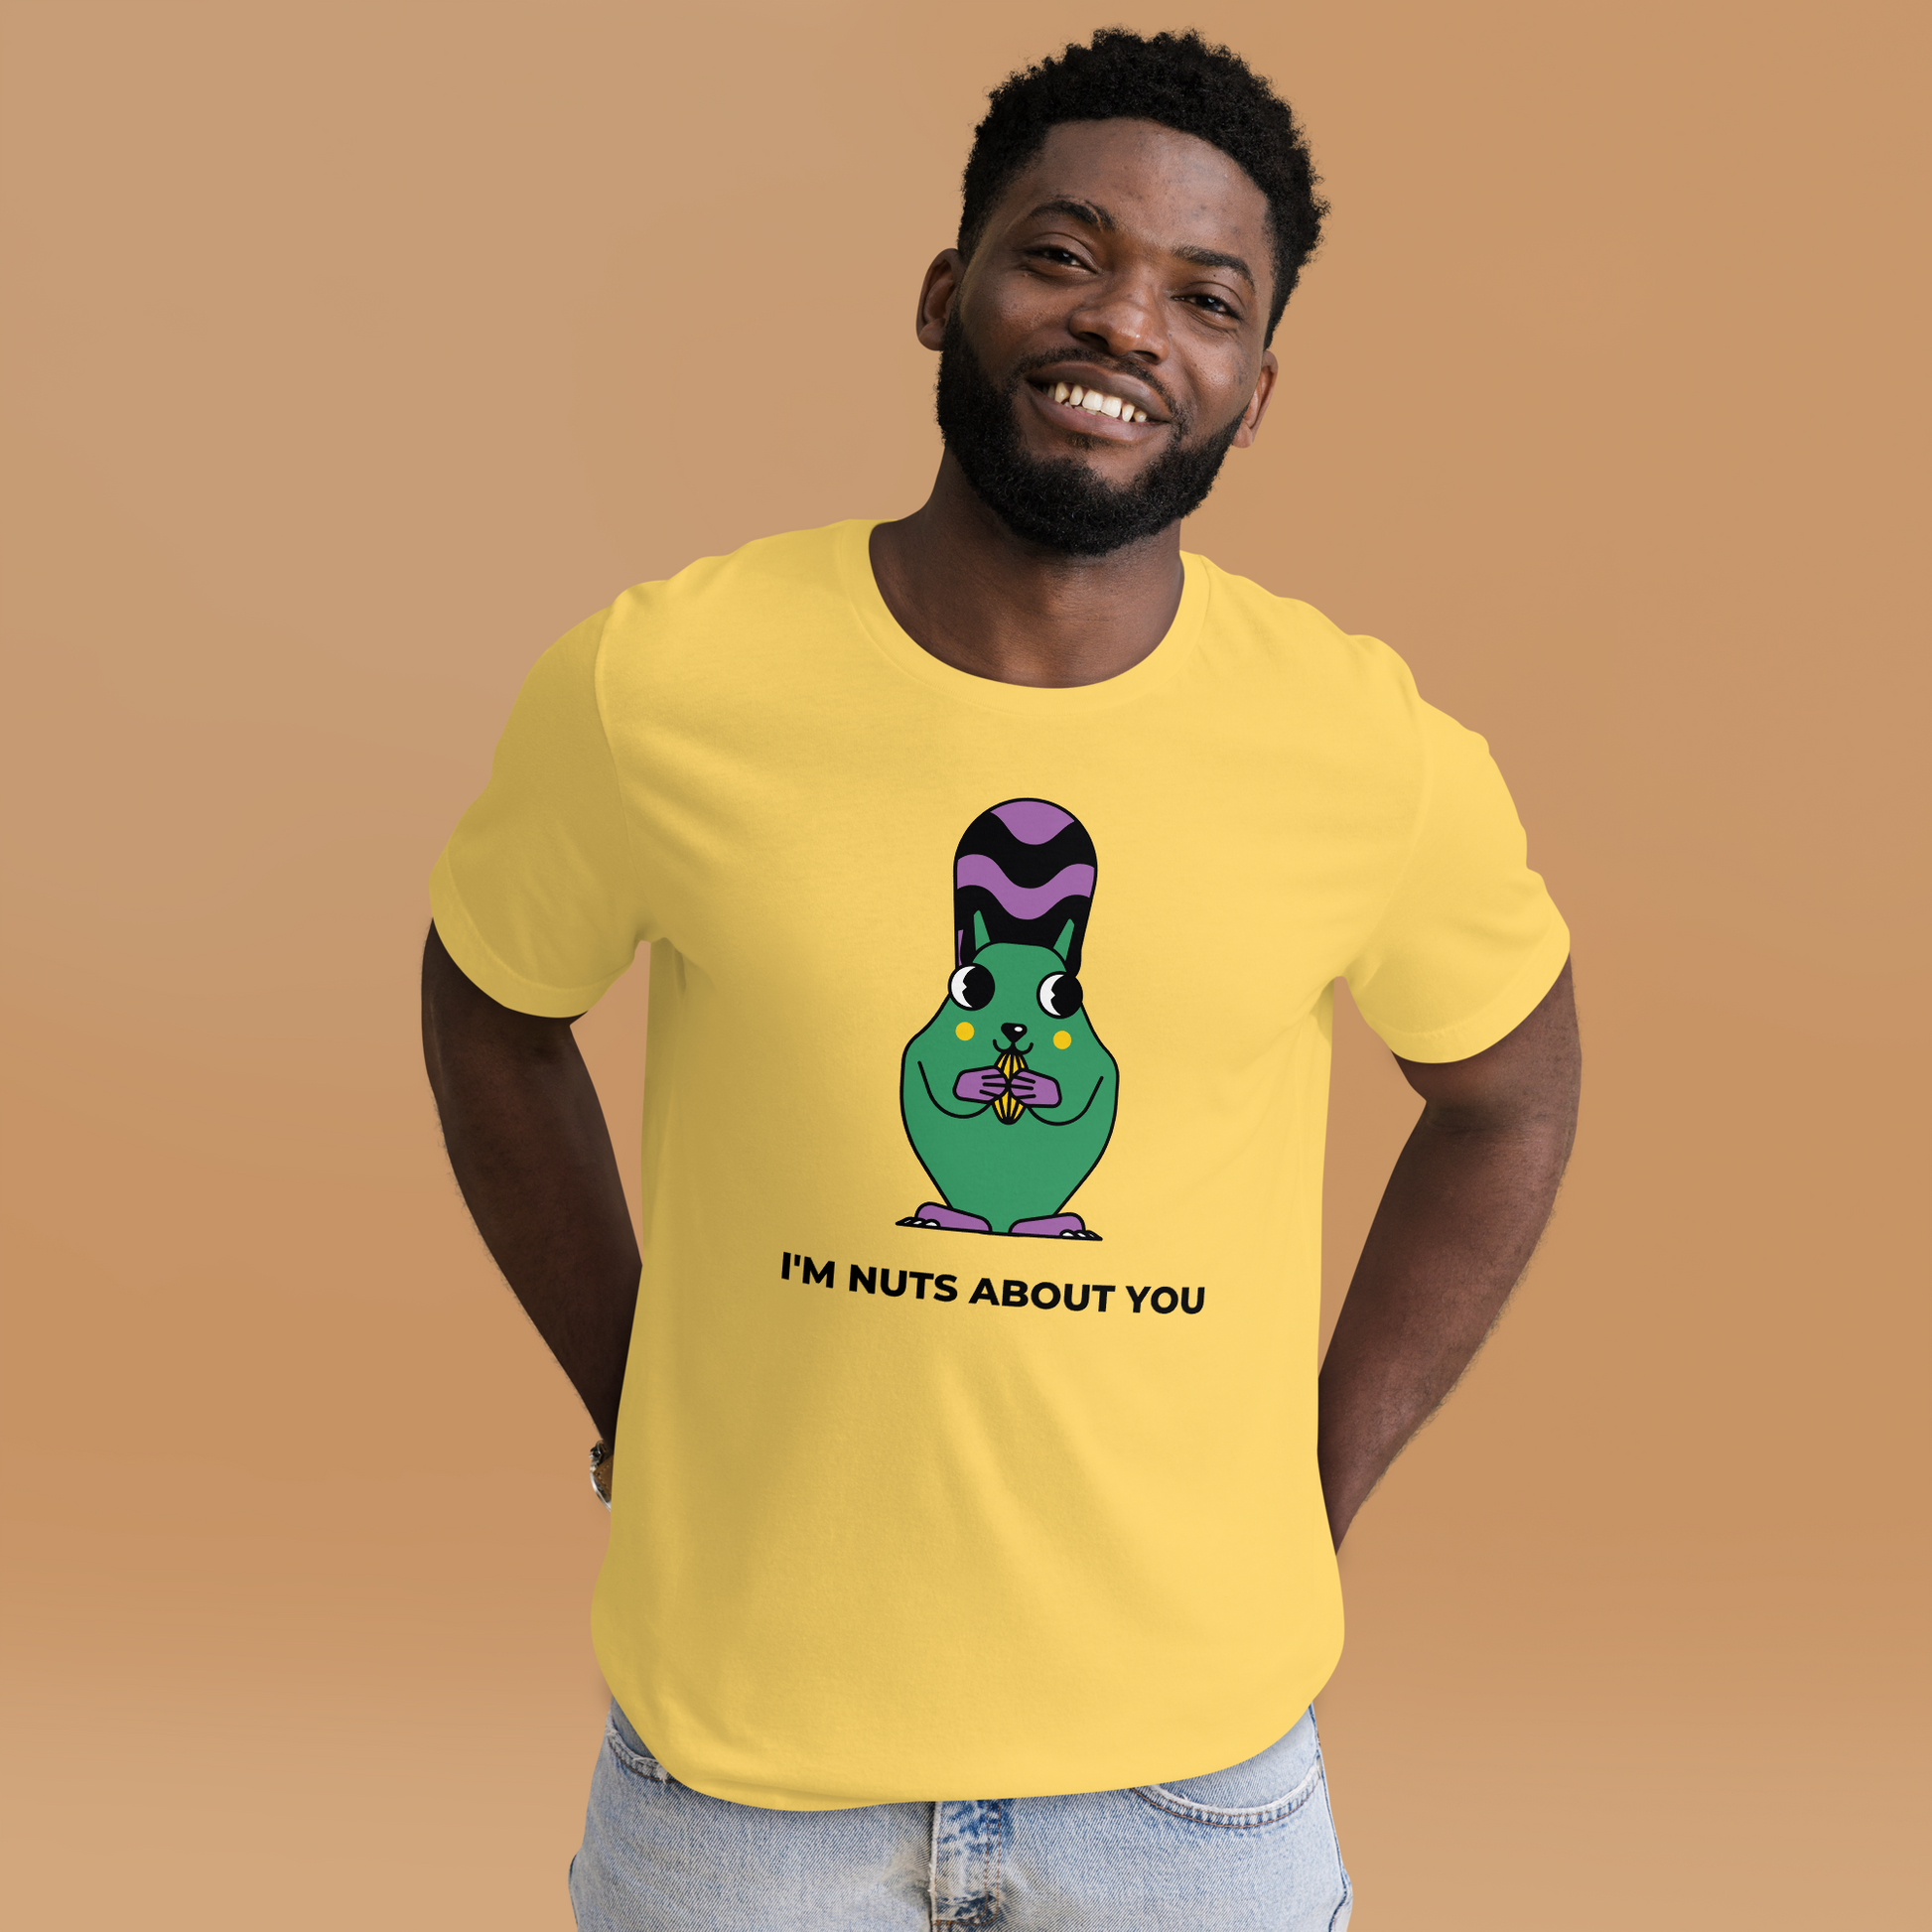 Smiling man wearing a Yellow Premium Squirrel T-Shirt featuring an I'm Nuts About You graphic on the chest - Funny Graphic Squirrel Tees - Boozy Fox